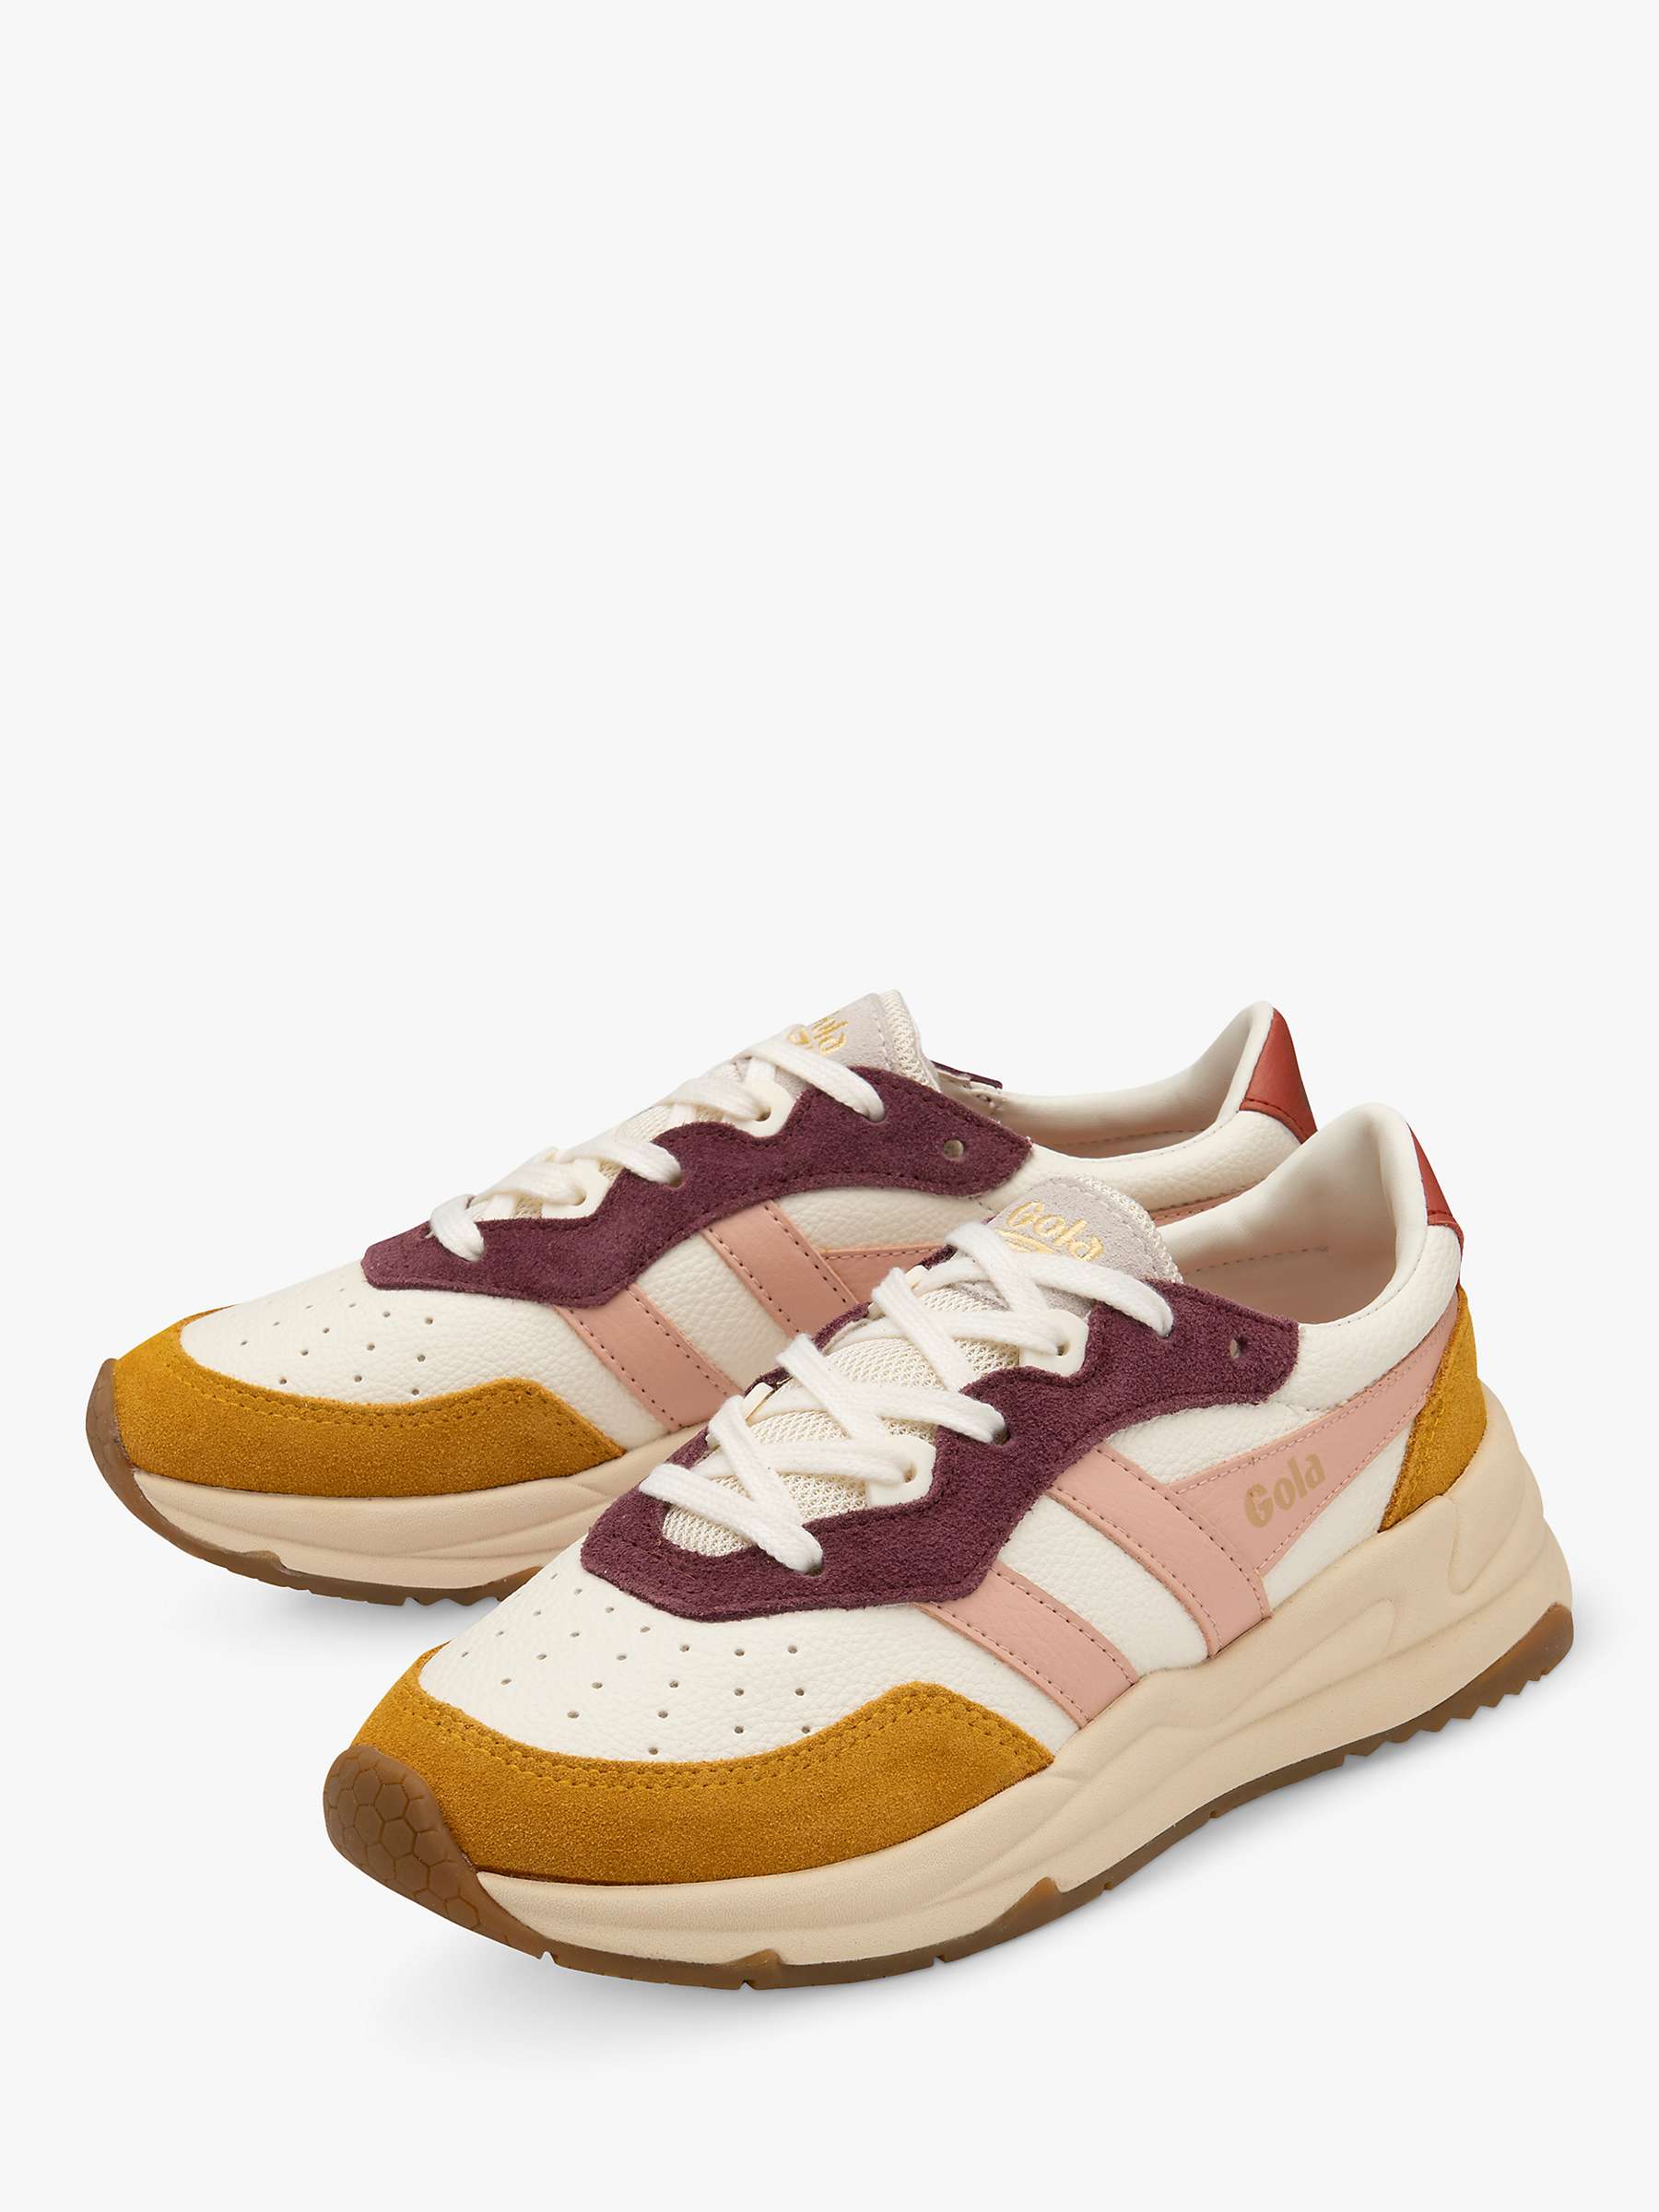 Buy Gola Classics Saturn Quadrant Recycled PU Lace Up Trainers Online at johnlewis.com